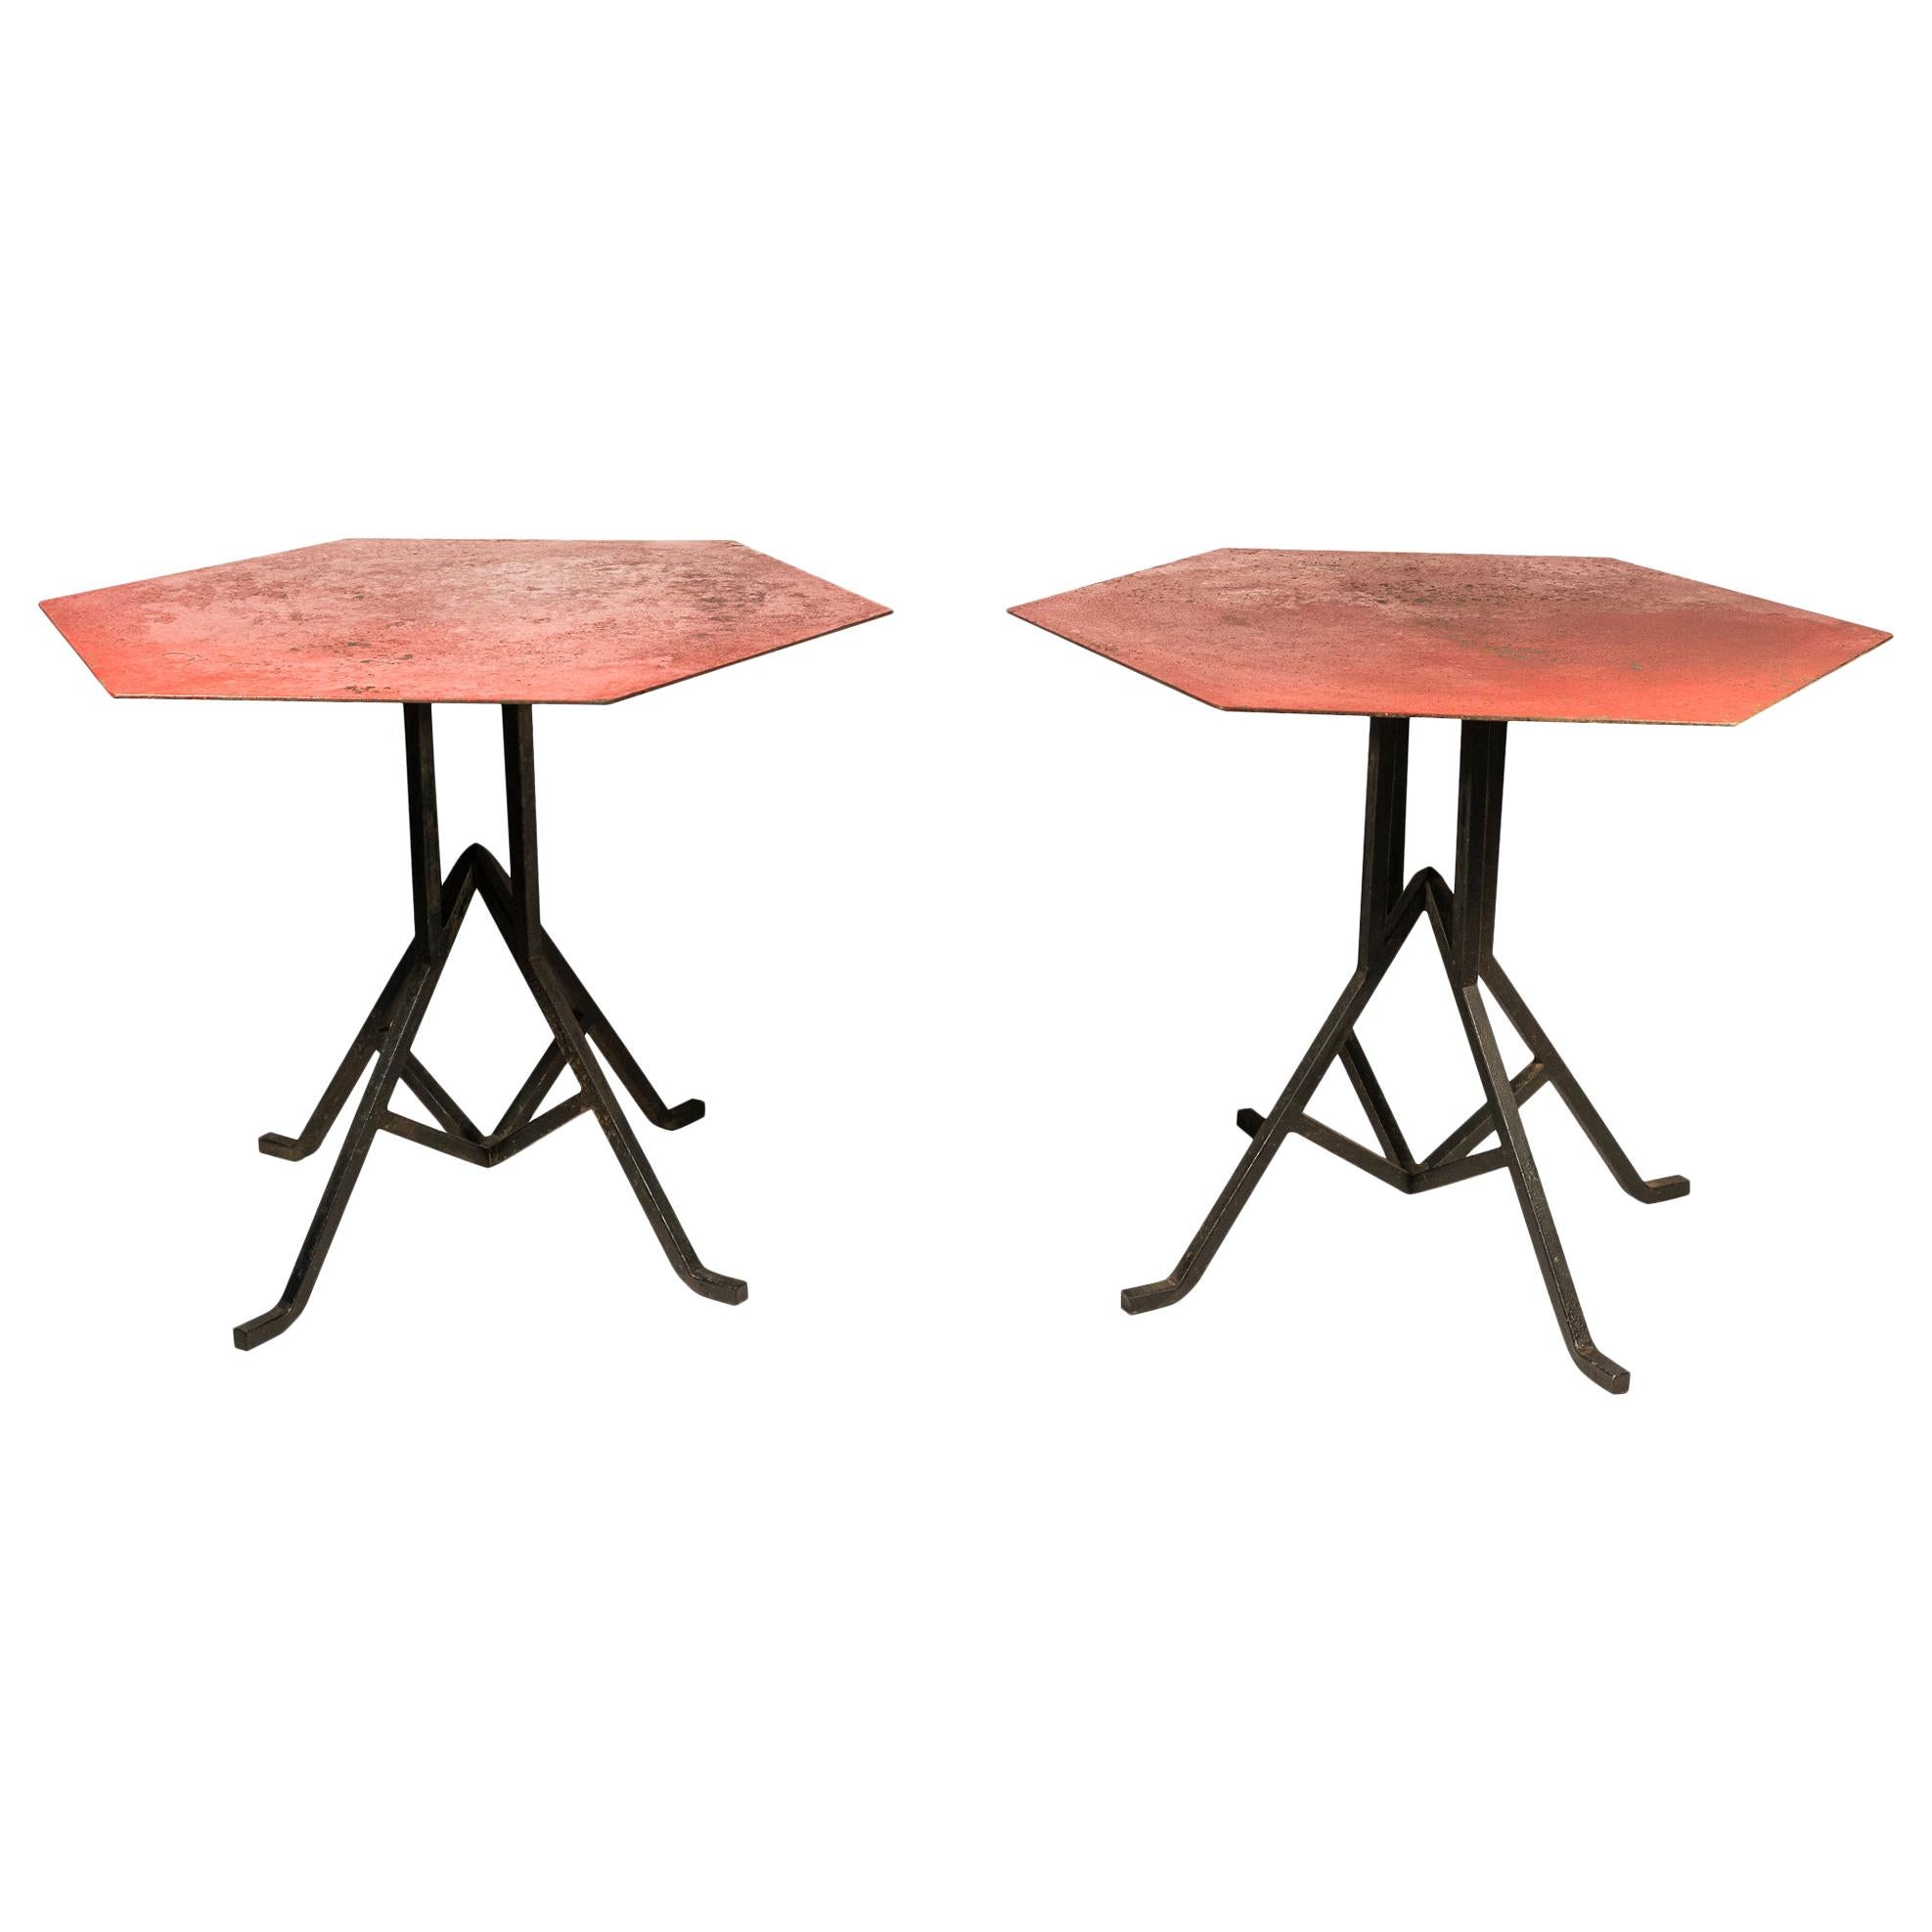 Frank Lloyd Wright, Pair of Tables, United States, circa 1927